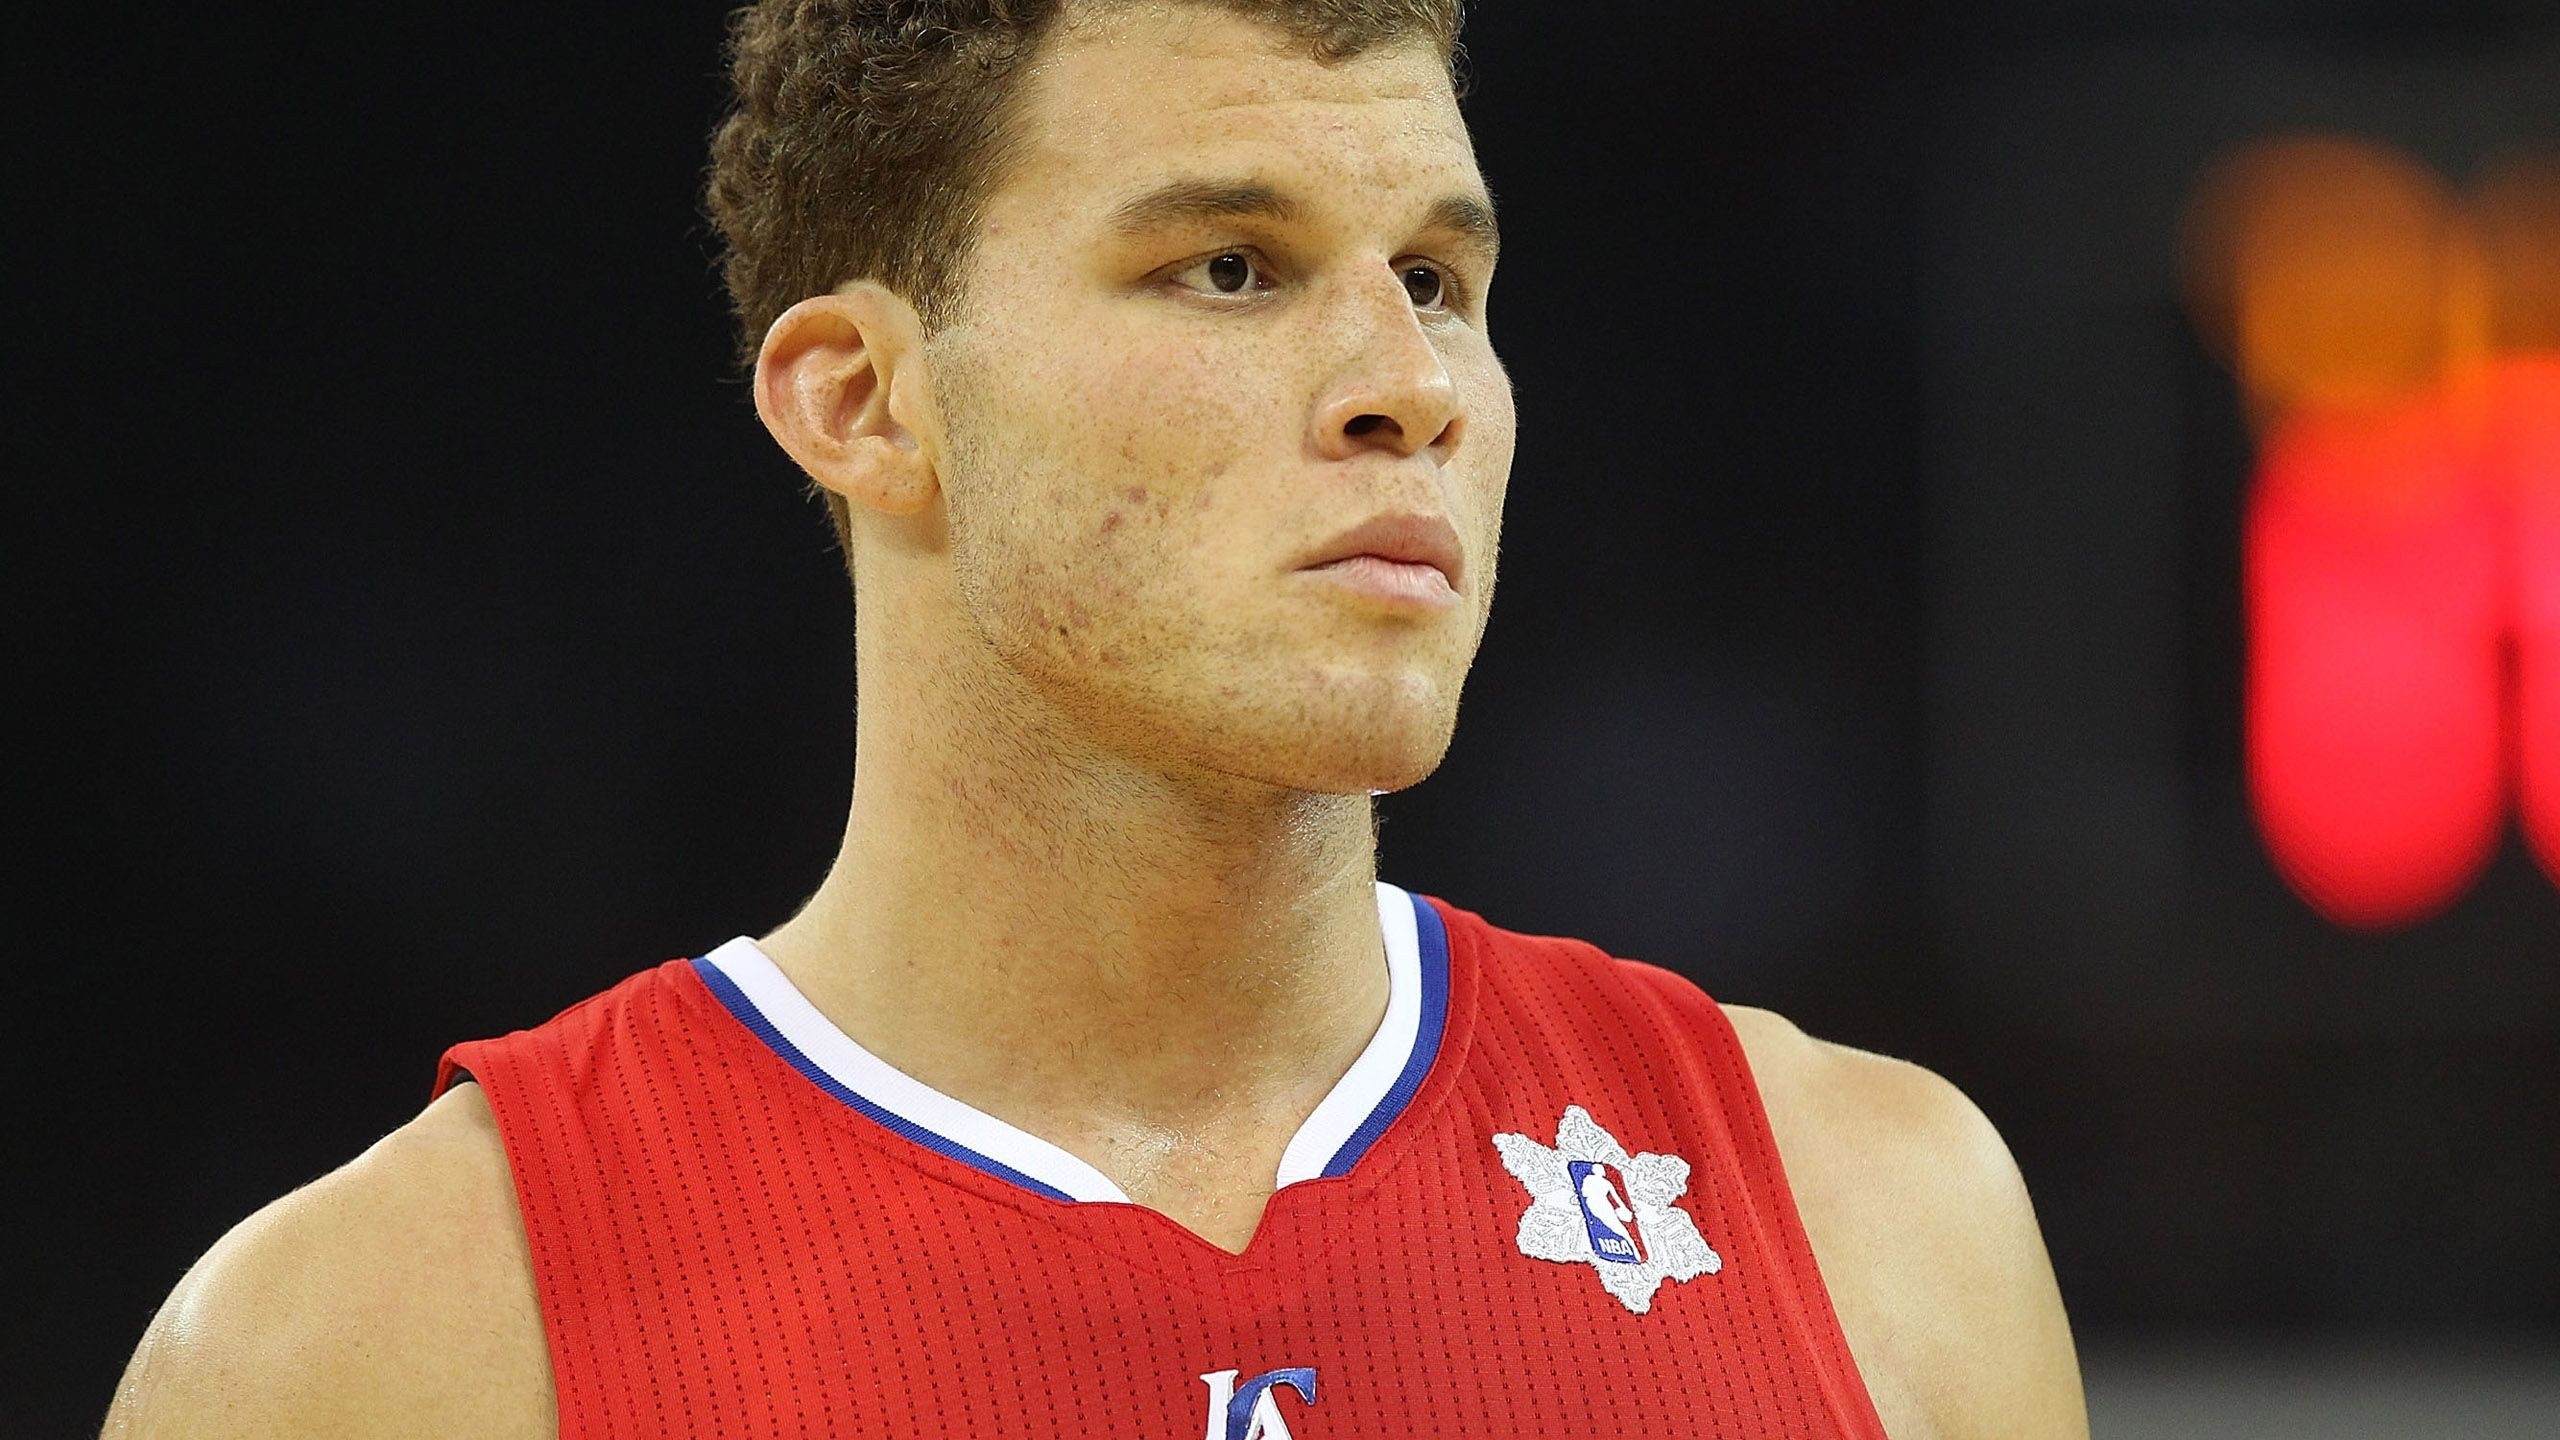 Los Angeles Clippers Nba American Basketball Power Forward Blake Griffin